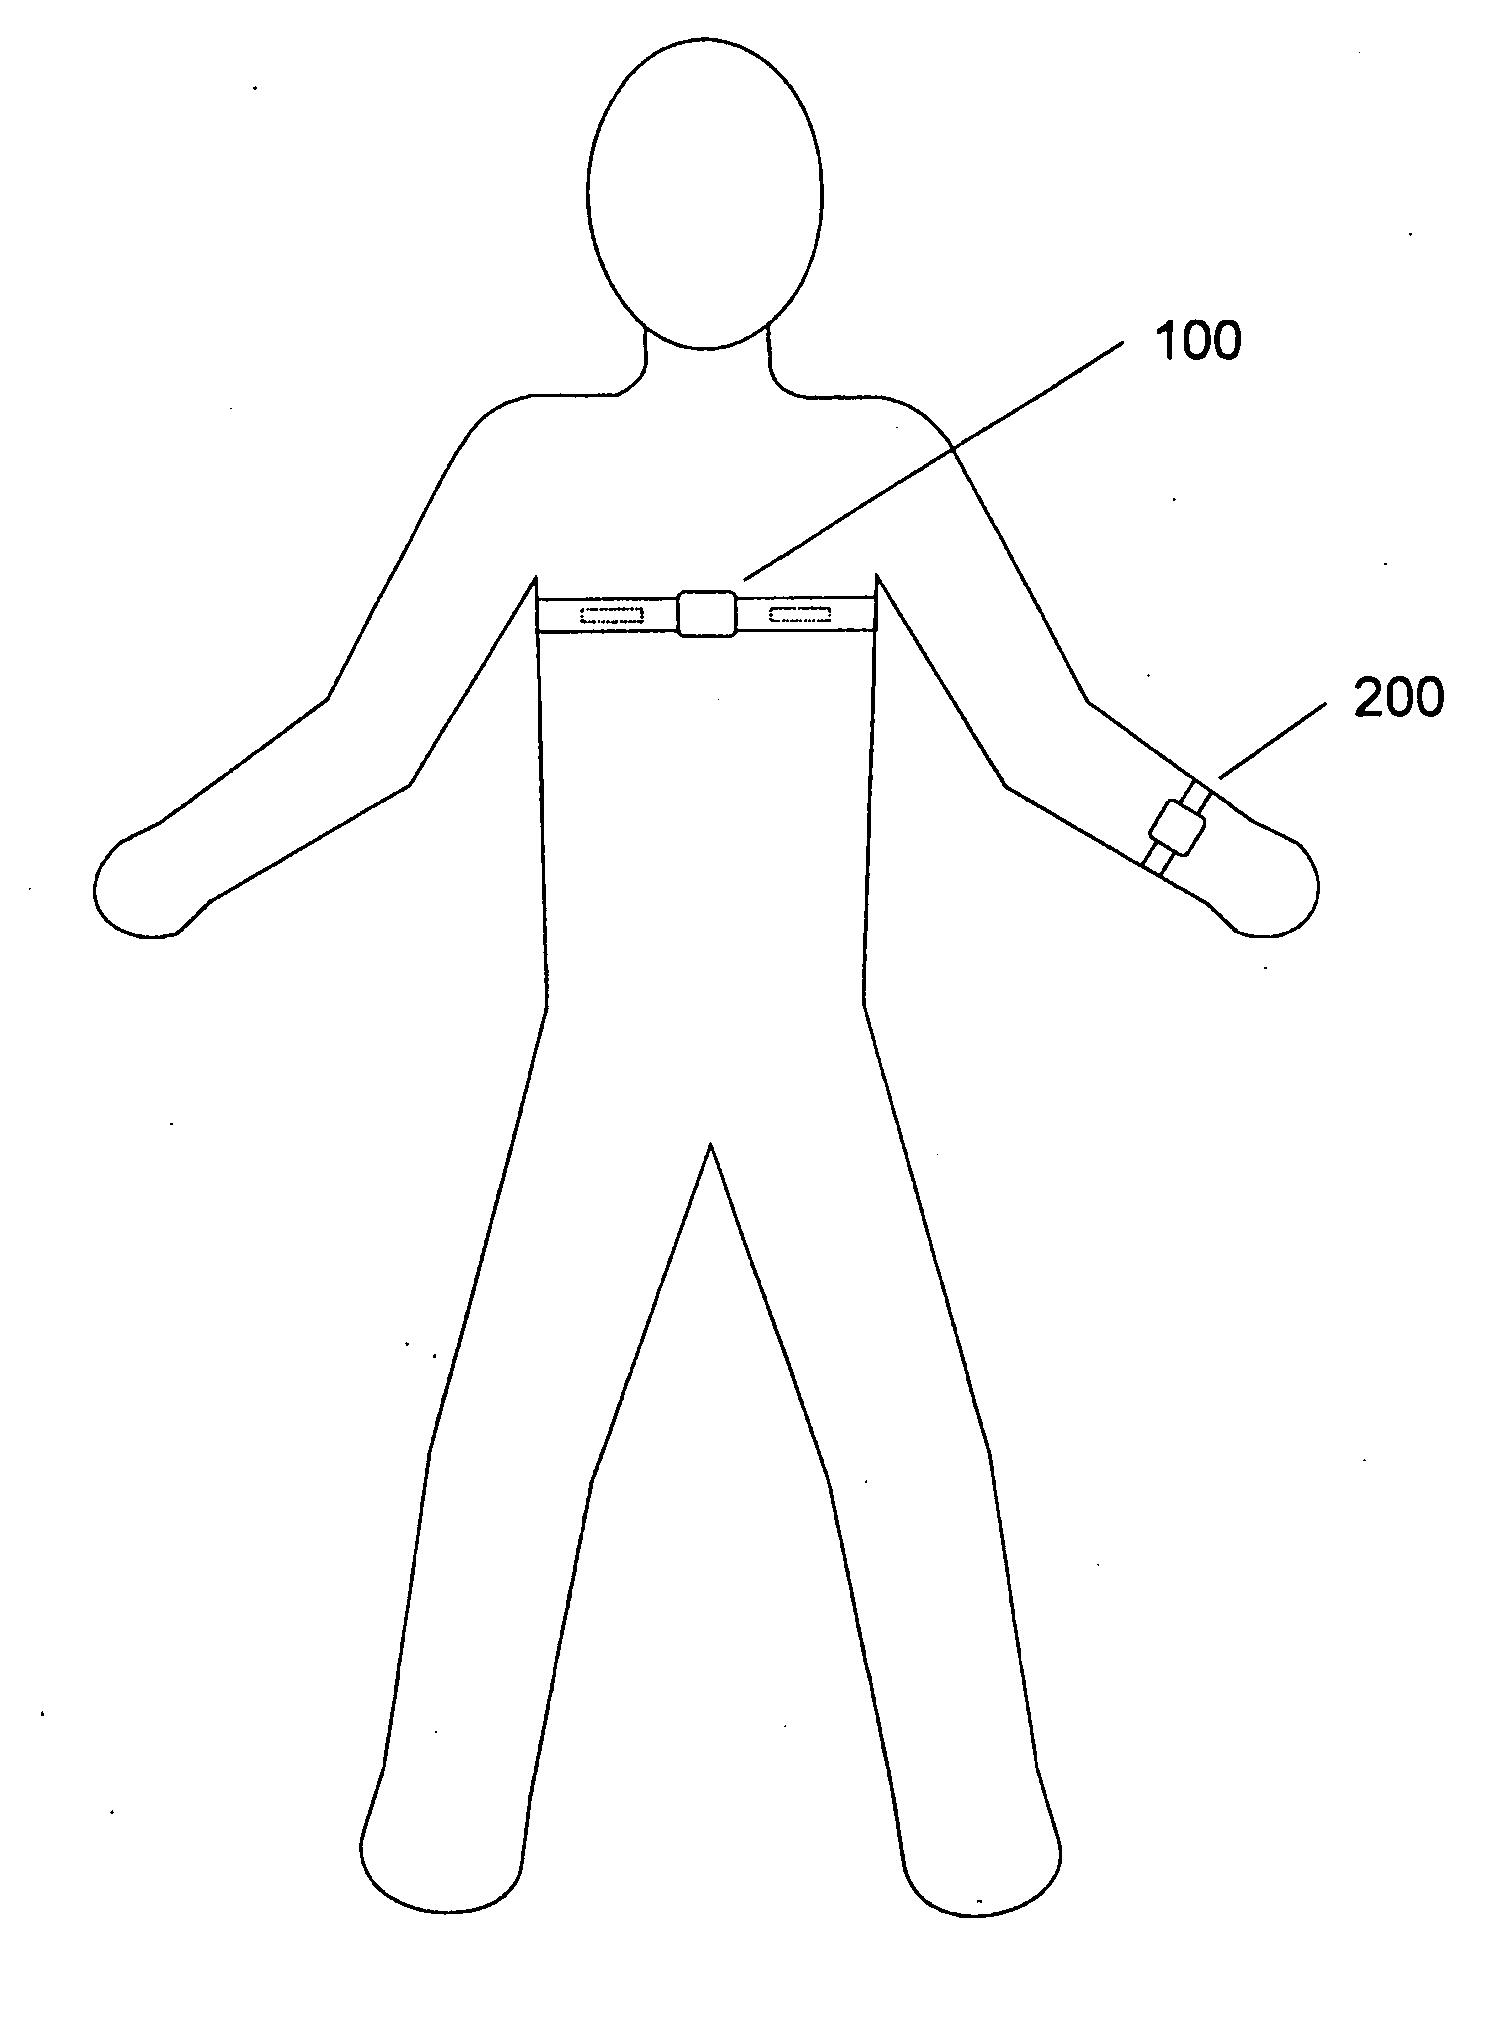 System for measurement of cardiovascular health